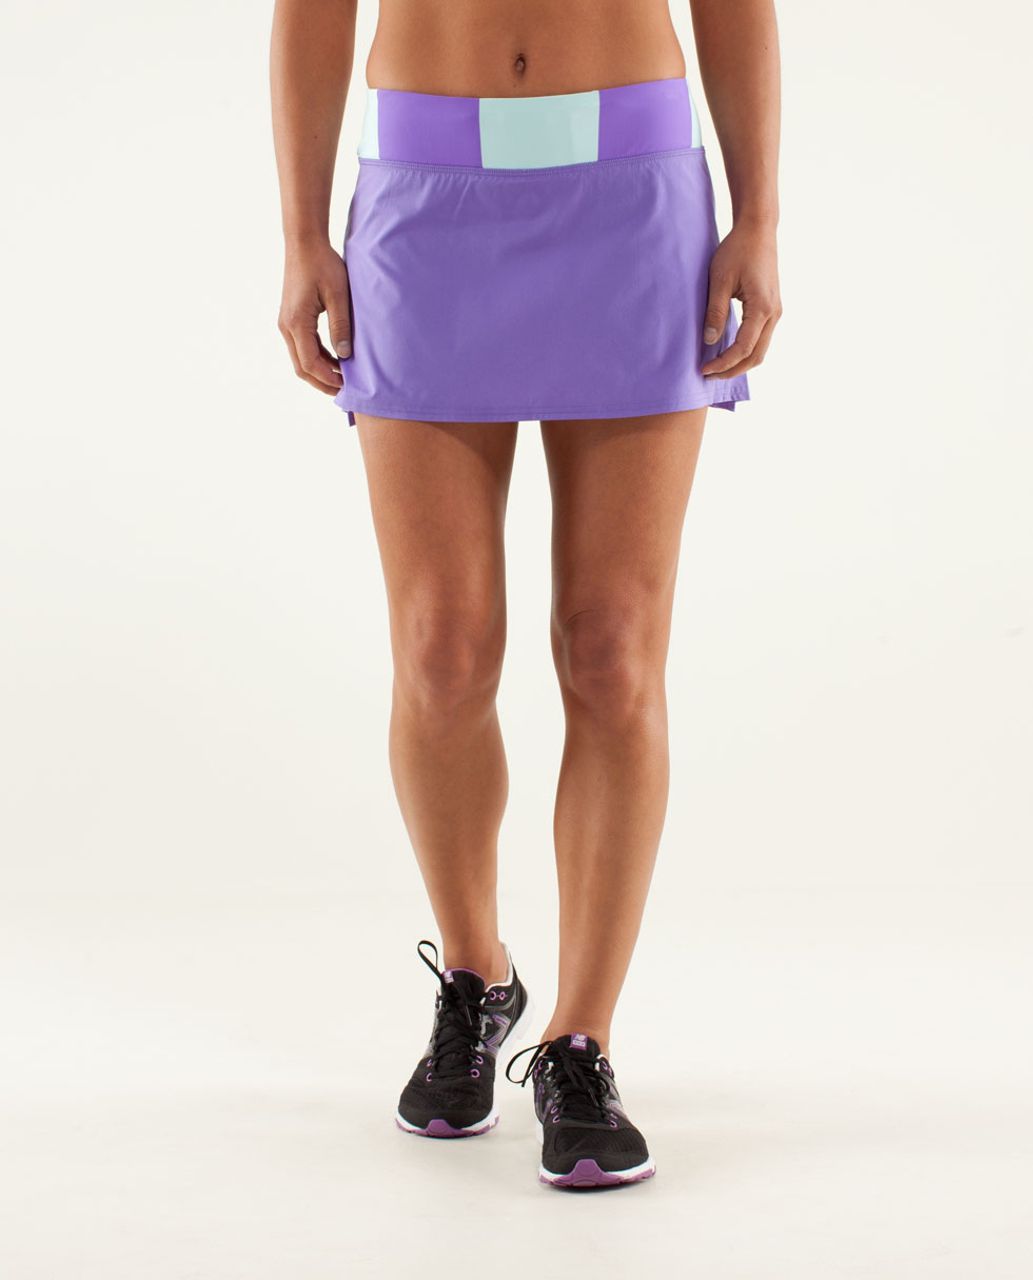 pace setter skirt Archives - Agent Athletica